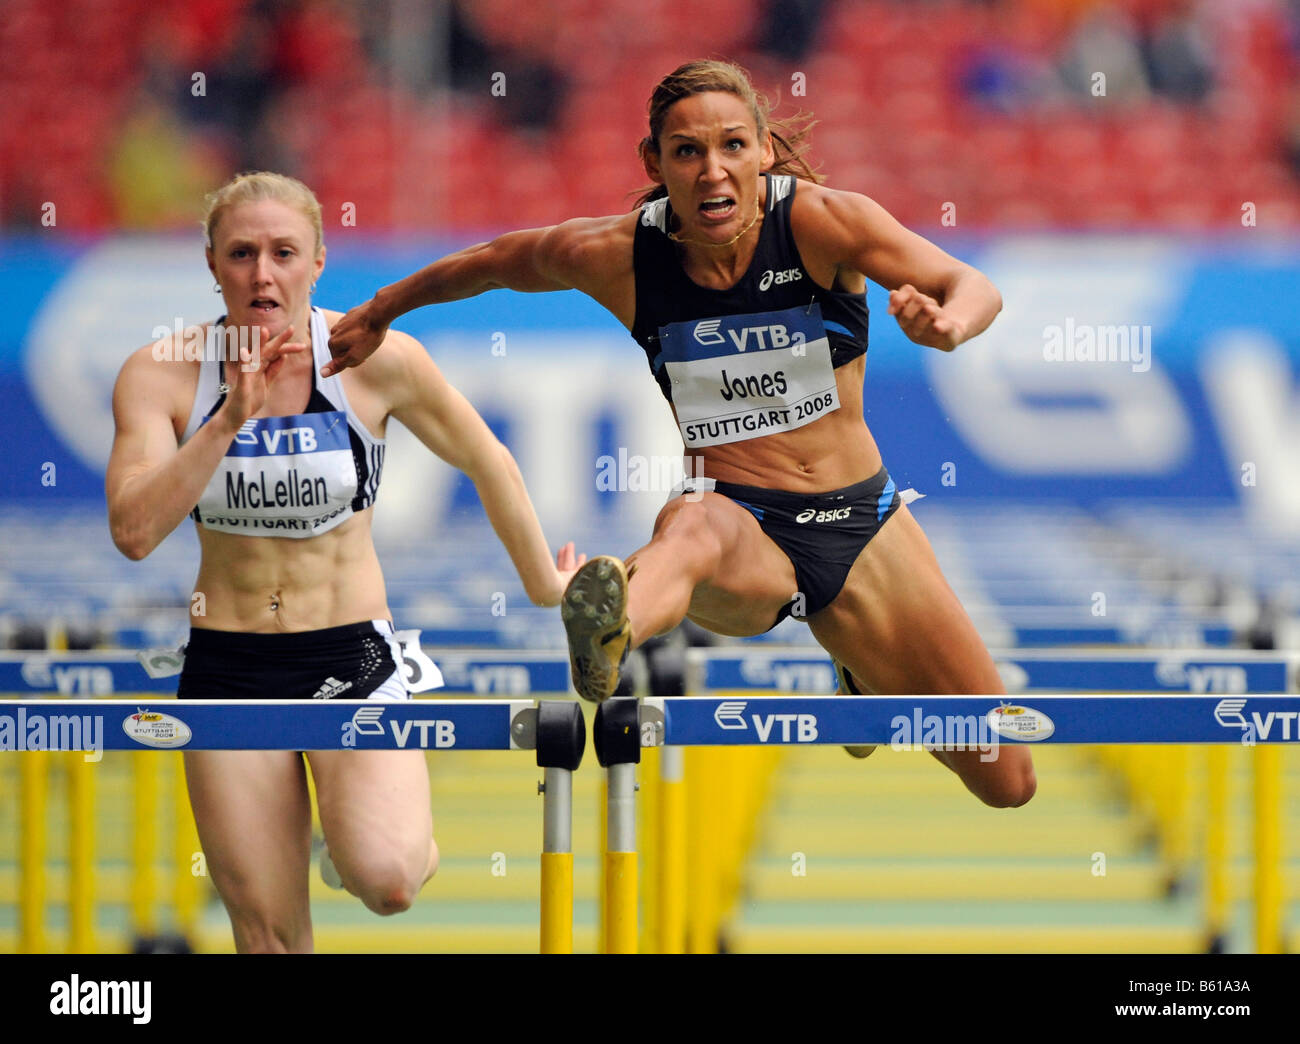 LoLo JONES, USA, right, Sally MCLELLAN, AUS, left, 100m hurdles, at the IAAF 2008 World Athletics Final for track and field in Stock Photo